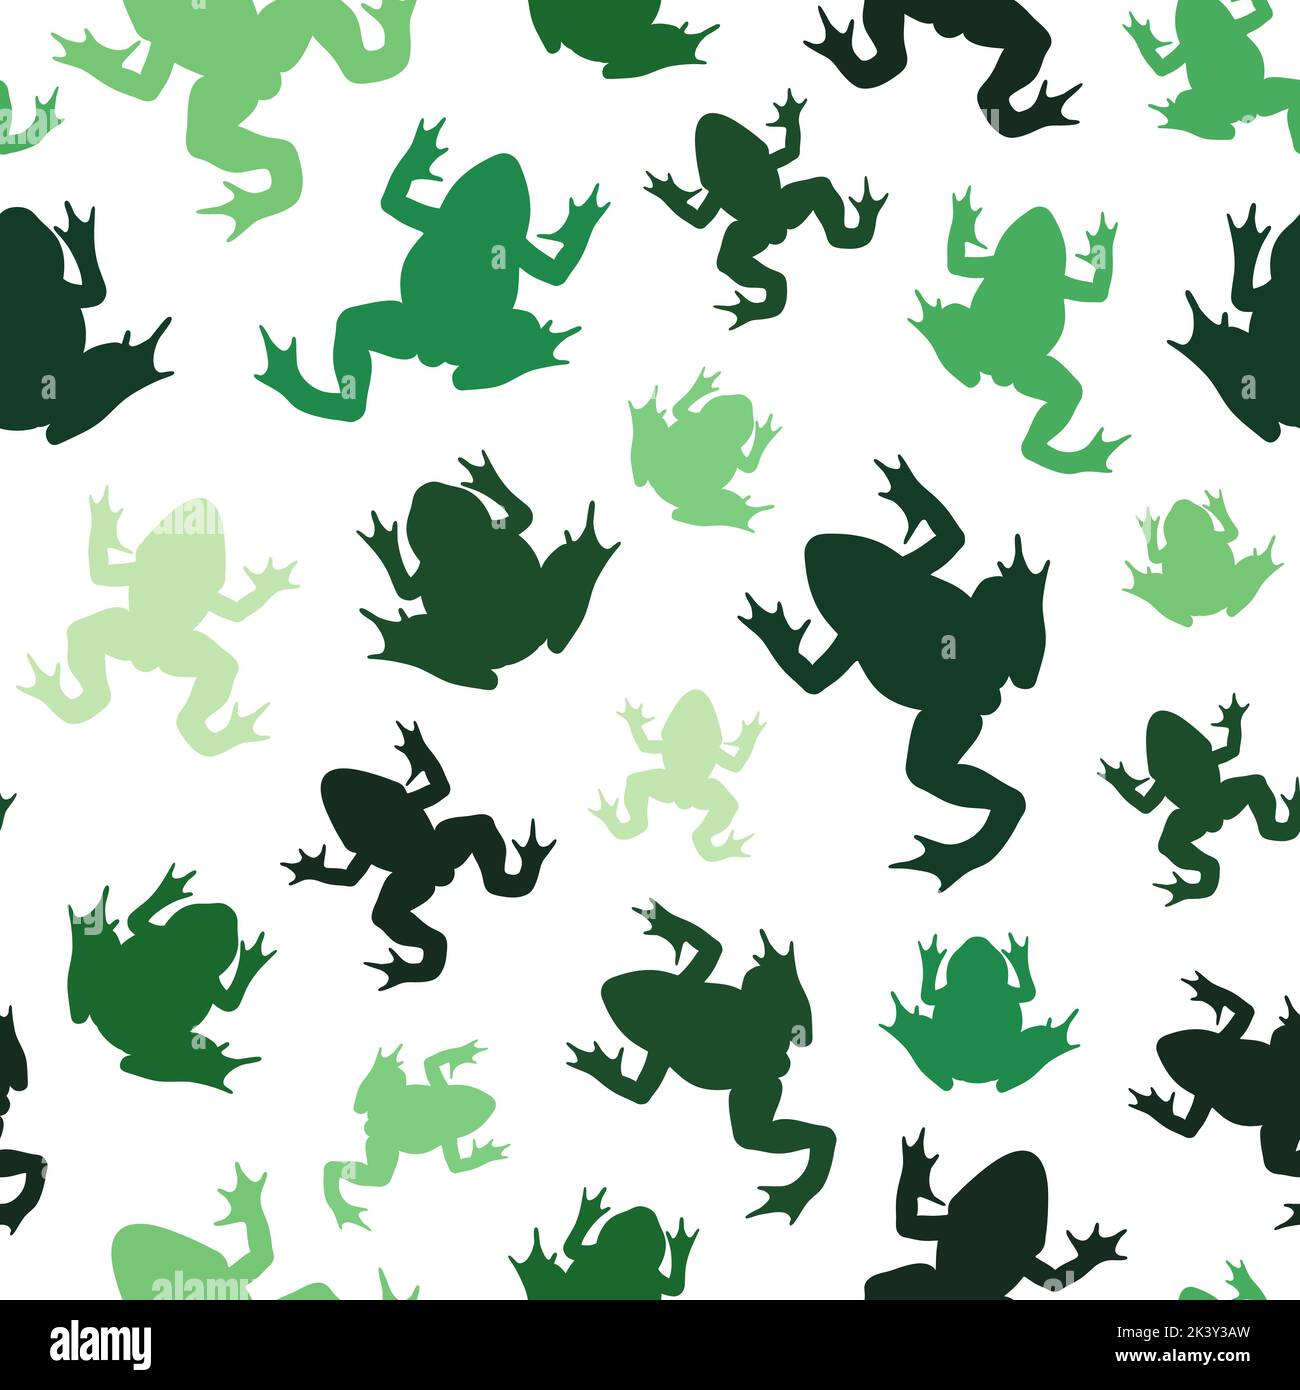 Seamless pattern with green silhouettes of river frogs. Colored vector background on white. Stock Vector